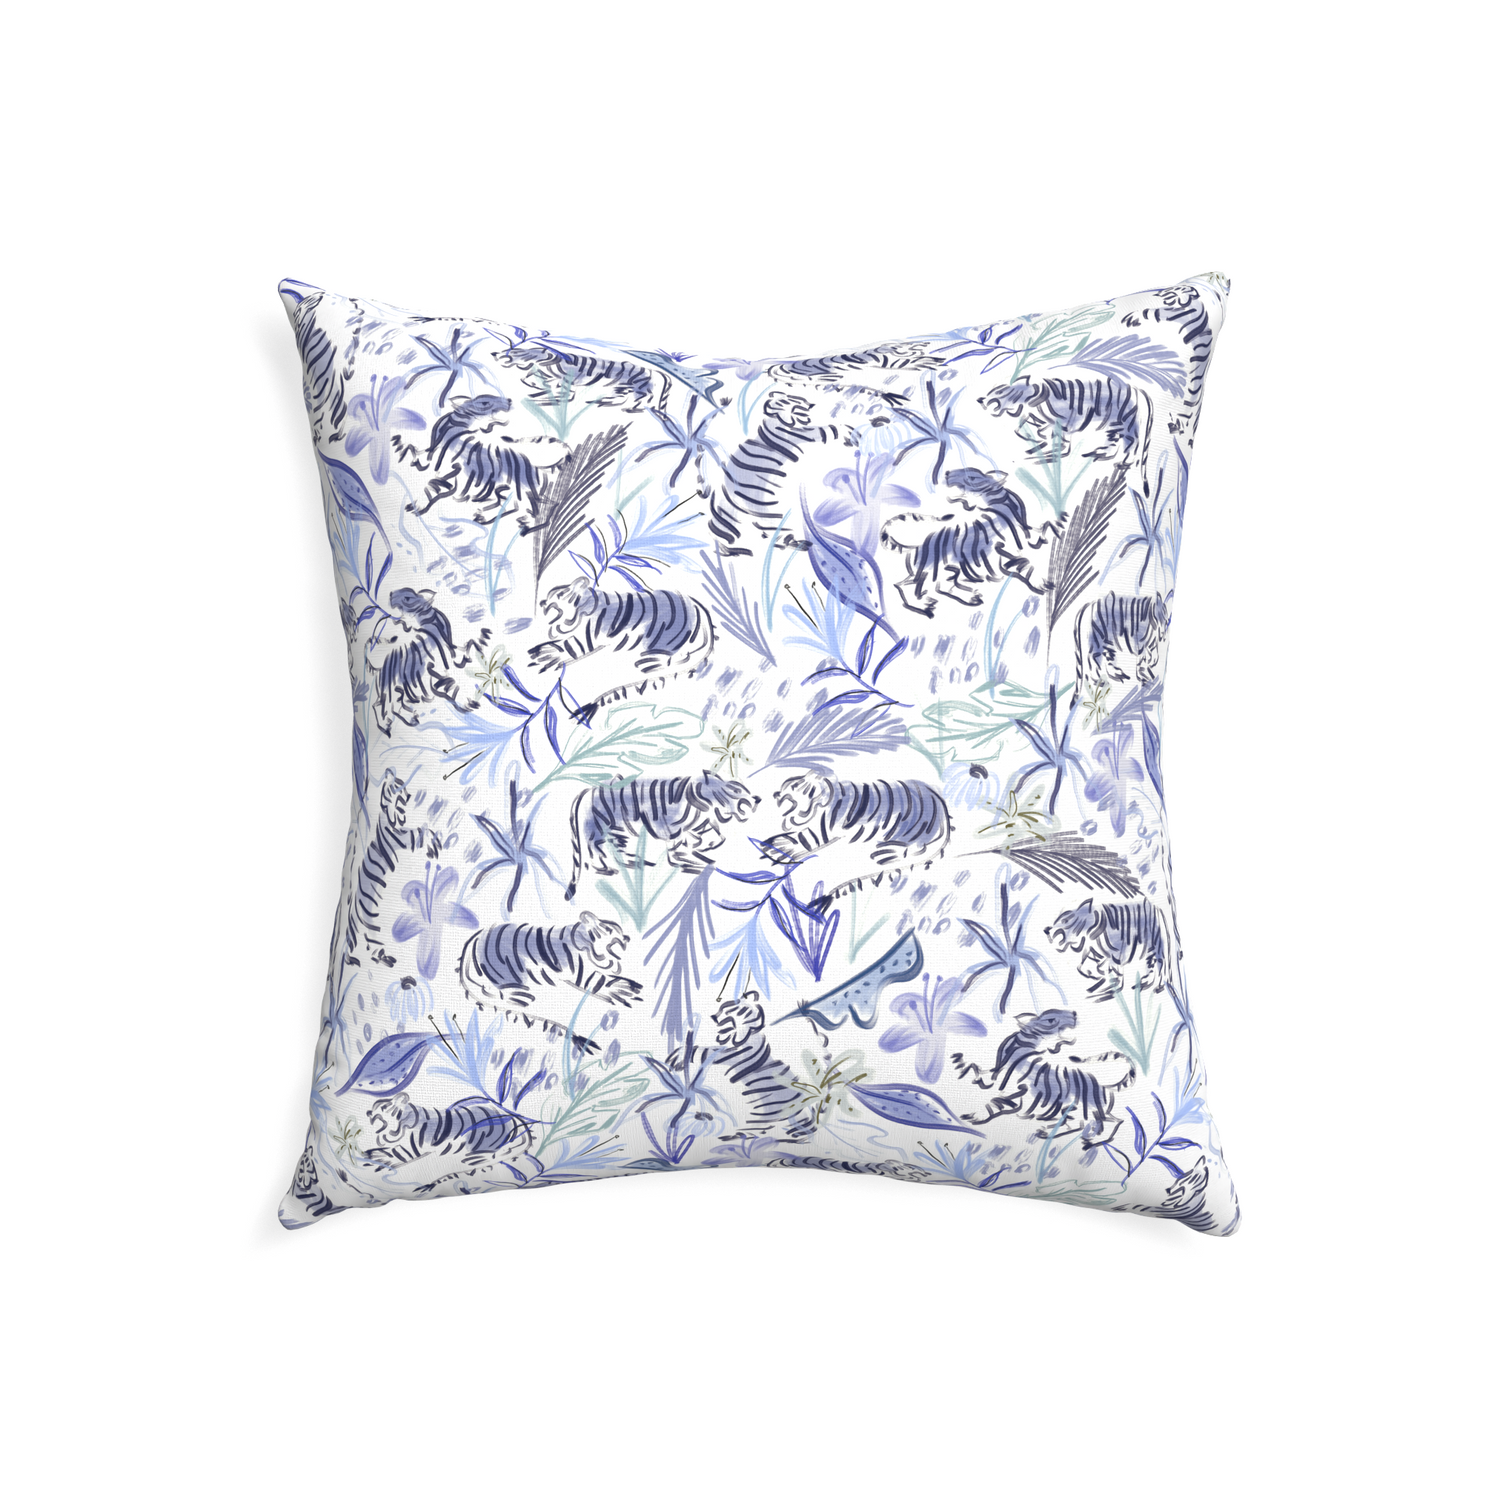 22-square frida blue custom blue with intricate tiger designpillow with none on white background